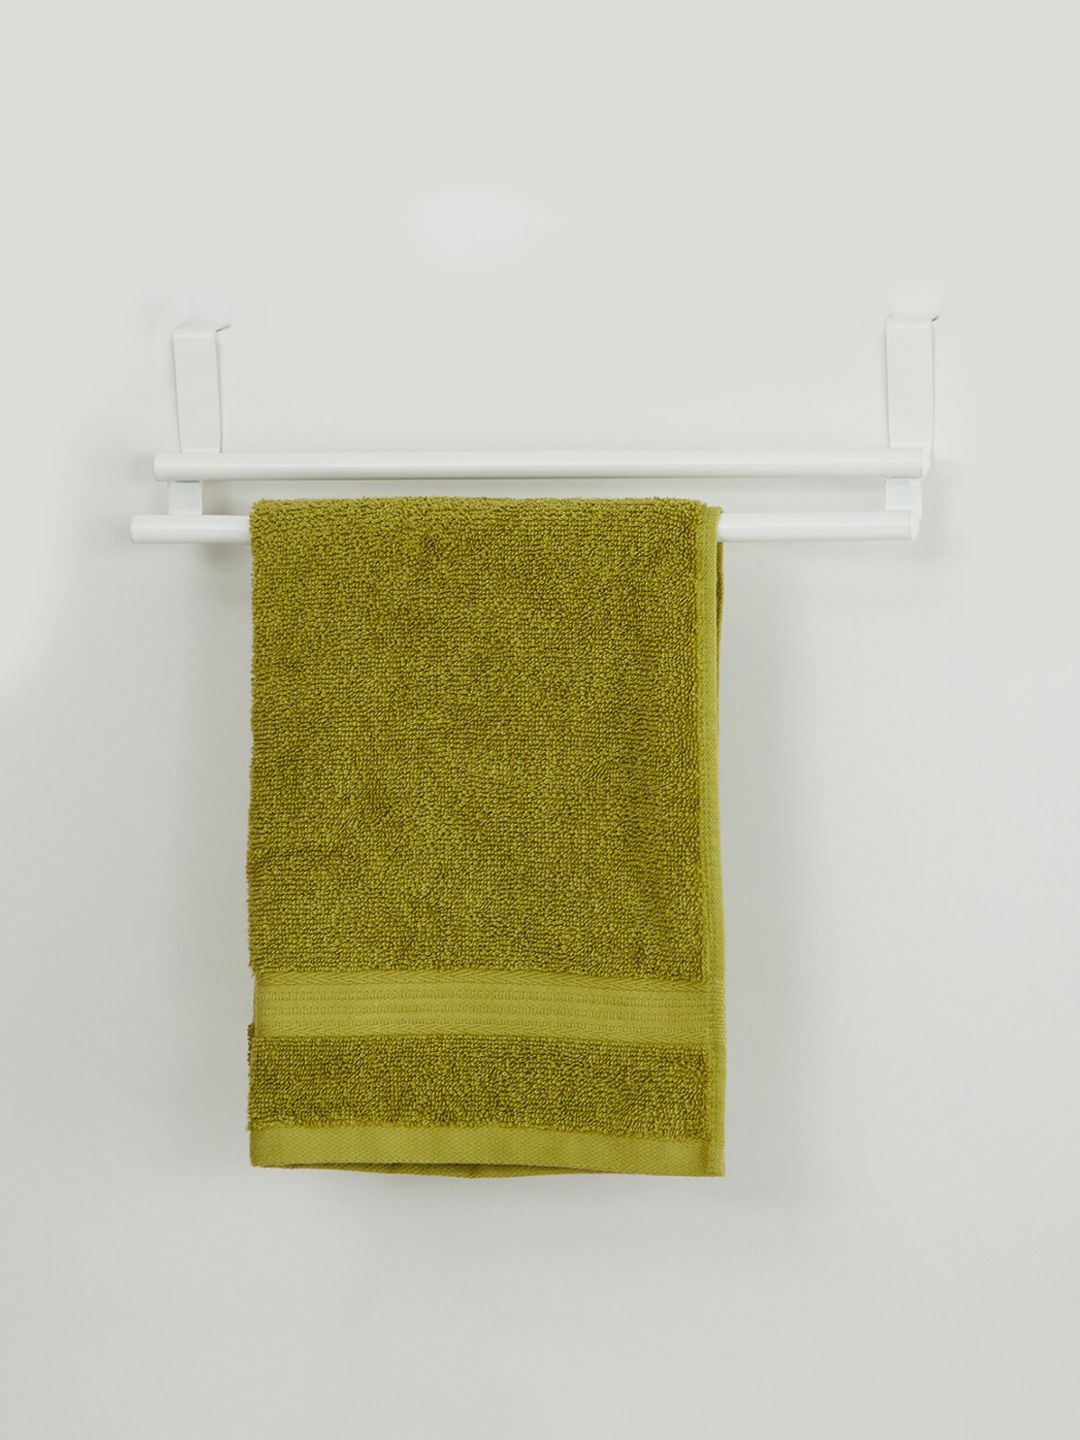 Home Centre Off White Metal Towel Rack Price in India